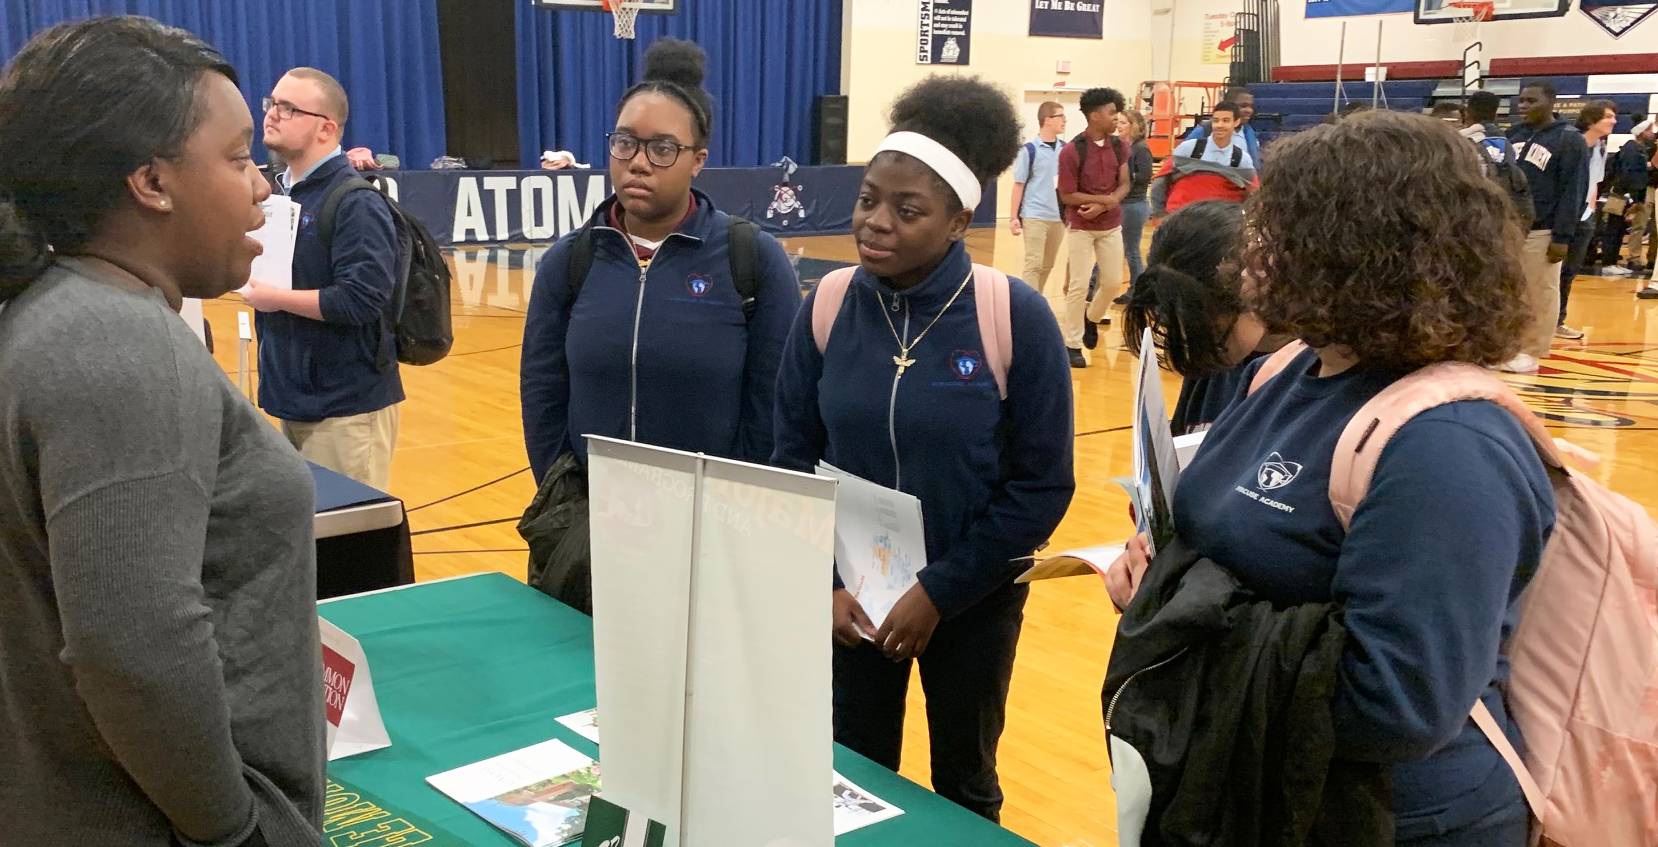 Syracuse Academy of Science High School hosted its 2019 - 2020 college fair